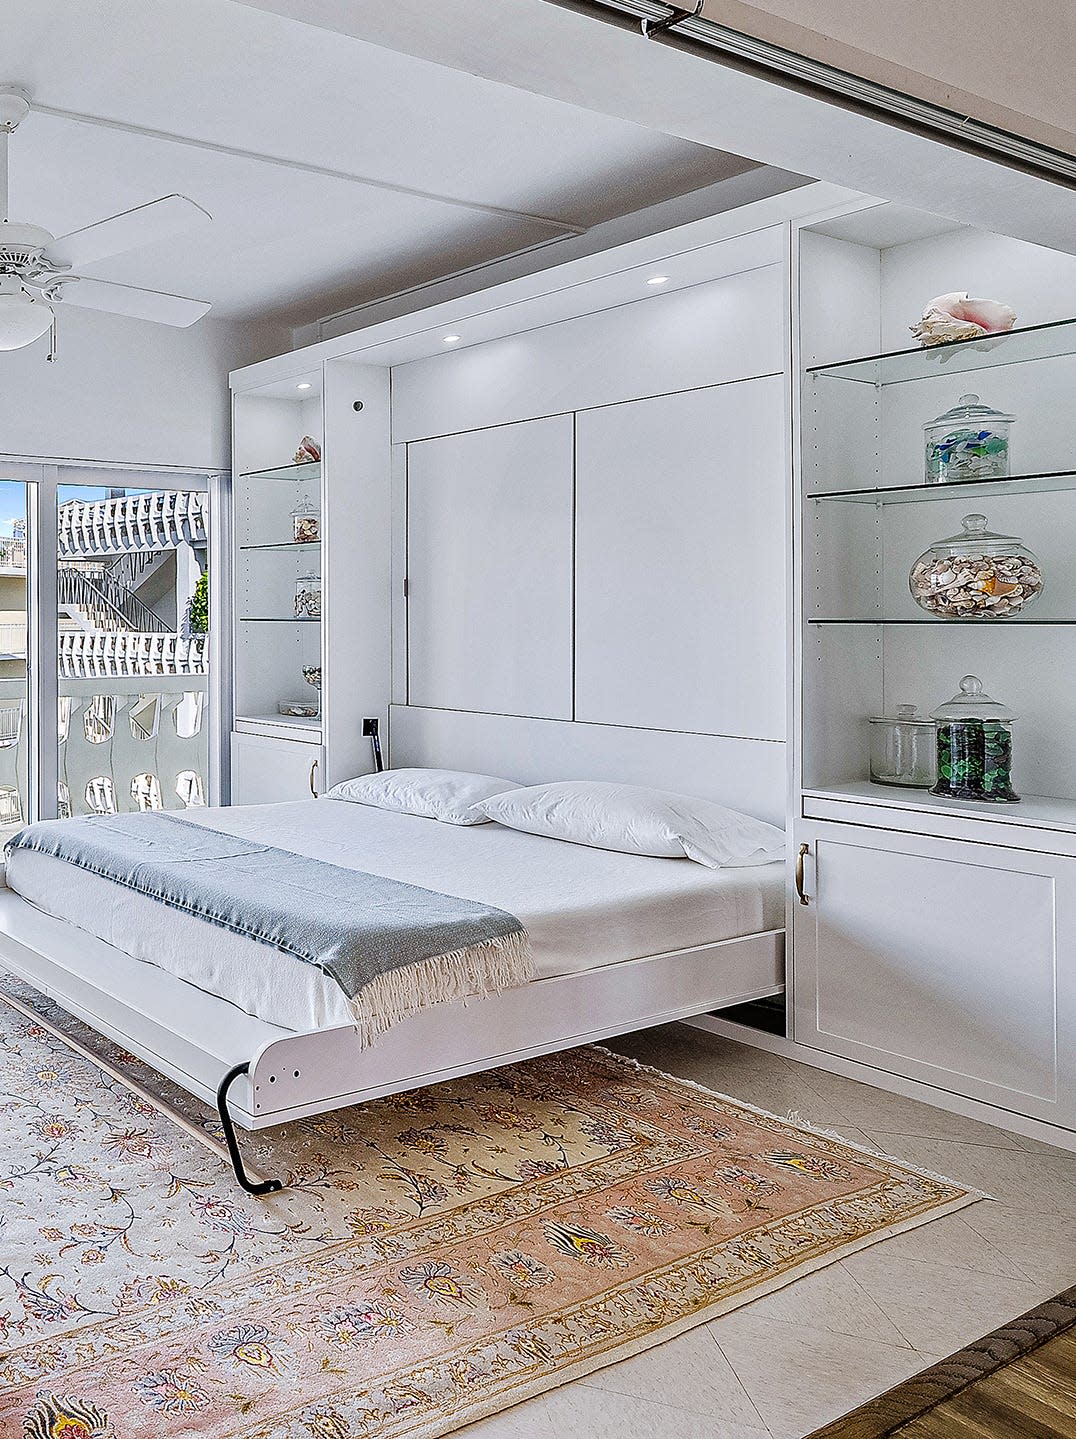 The Paulinos added built-in cabinetry and a pull-down Murphy bed to the sunroom.